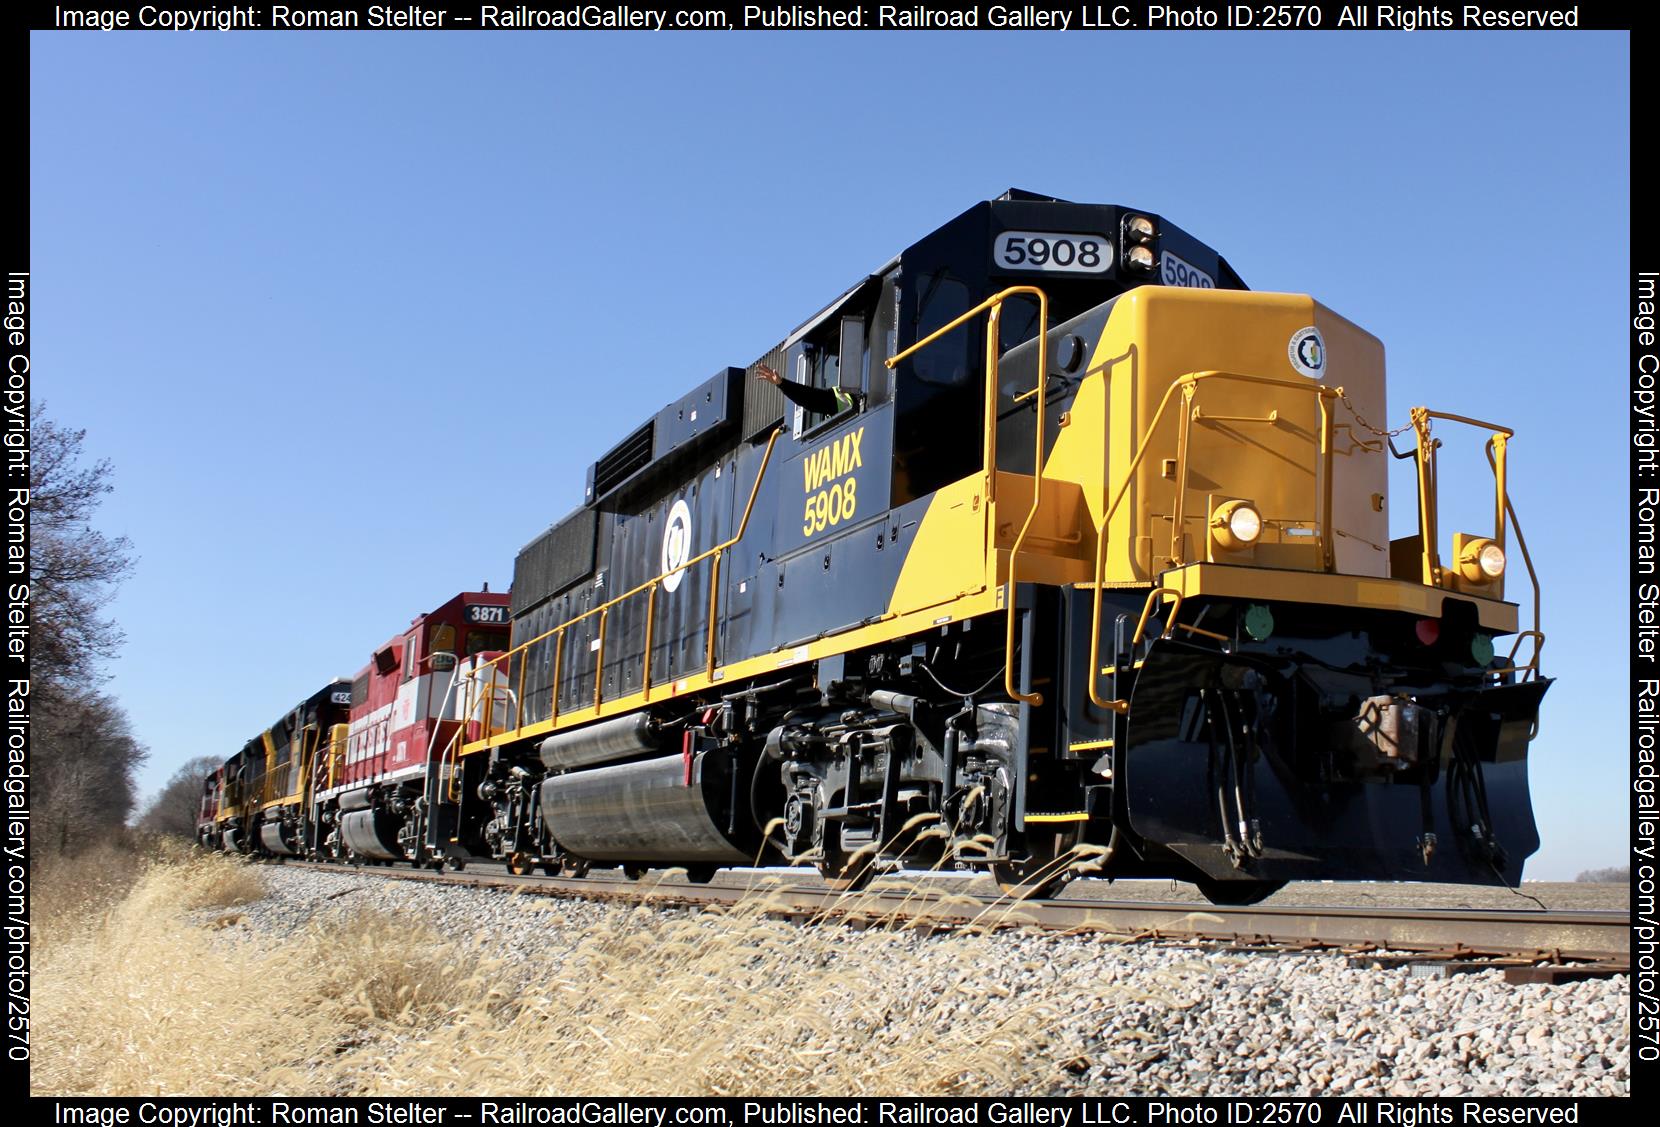 DREI 5906 is a class GP59 and  is pictured in Chrisman, Illinois, Illinois, United States.  This was taken along the Decatur-Paris mainline.  on the Decatur & Eastern Illinois Railroad. Photo Copyright: Roman Stelter uploaded to Railroad Gallery on 12/03/2023. This photograph of DREI 5906 was taken on Wednesday, November 29, 2023. All Rights Reserved. 